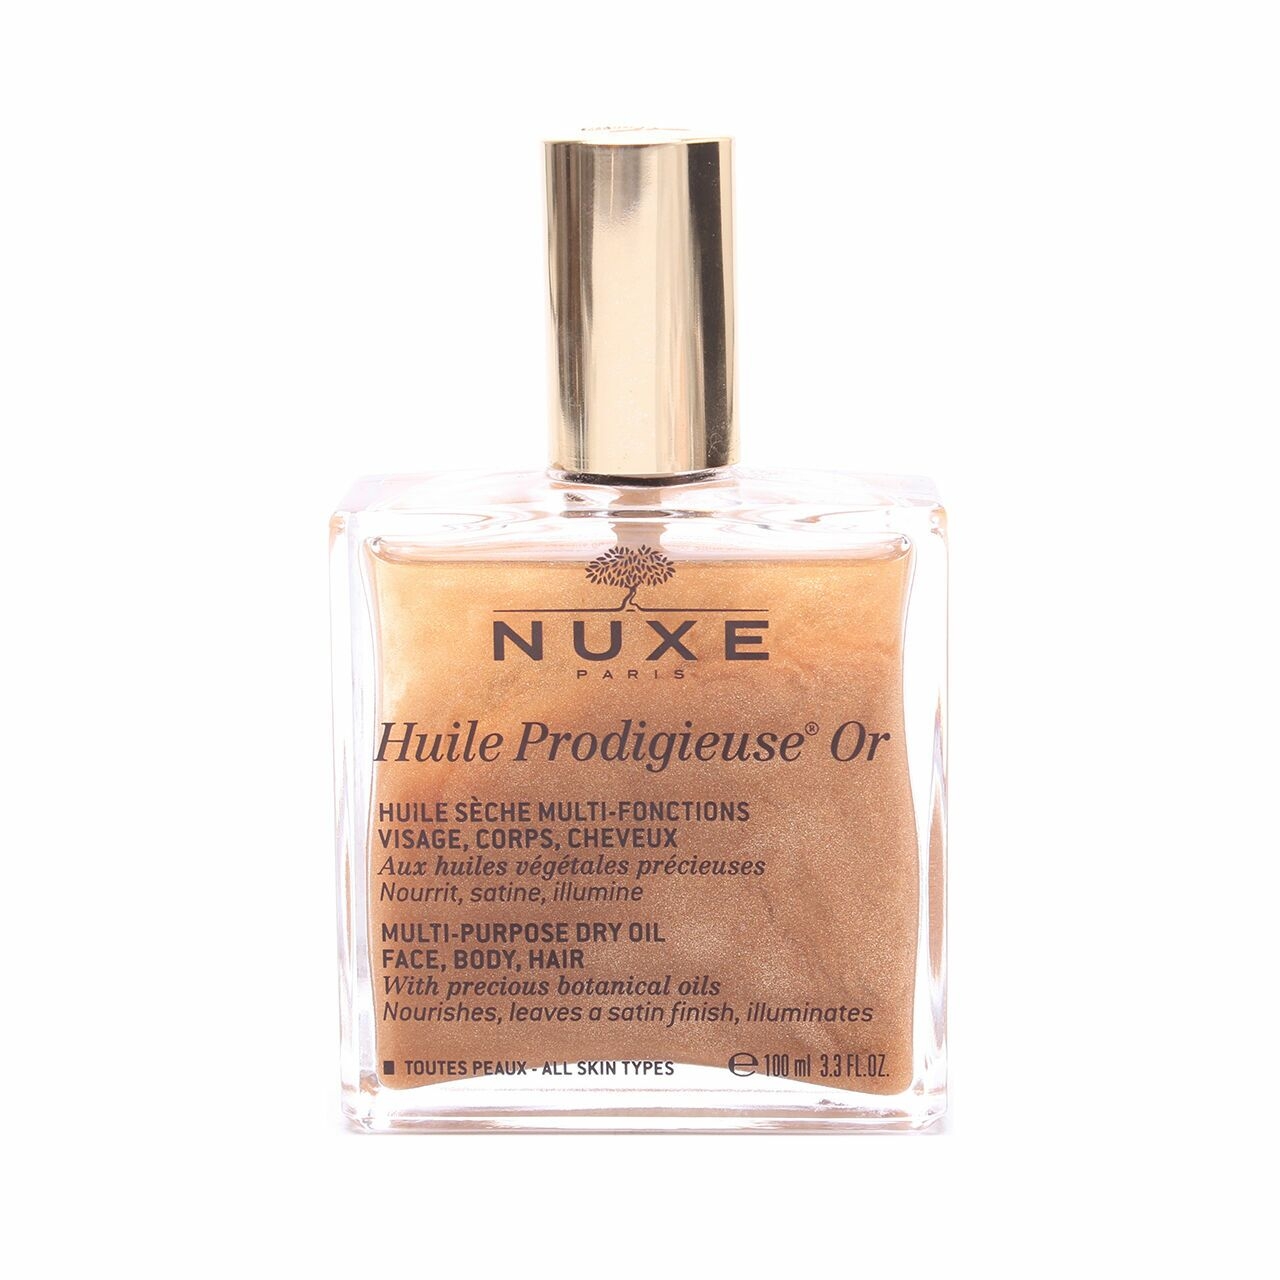 Nuxe Multi-Purpose Dry Oil Face, Body, Hair Skin Care